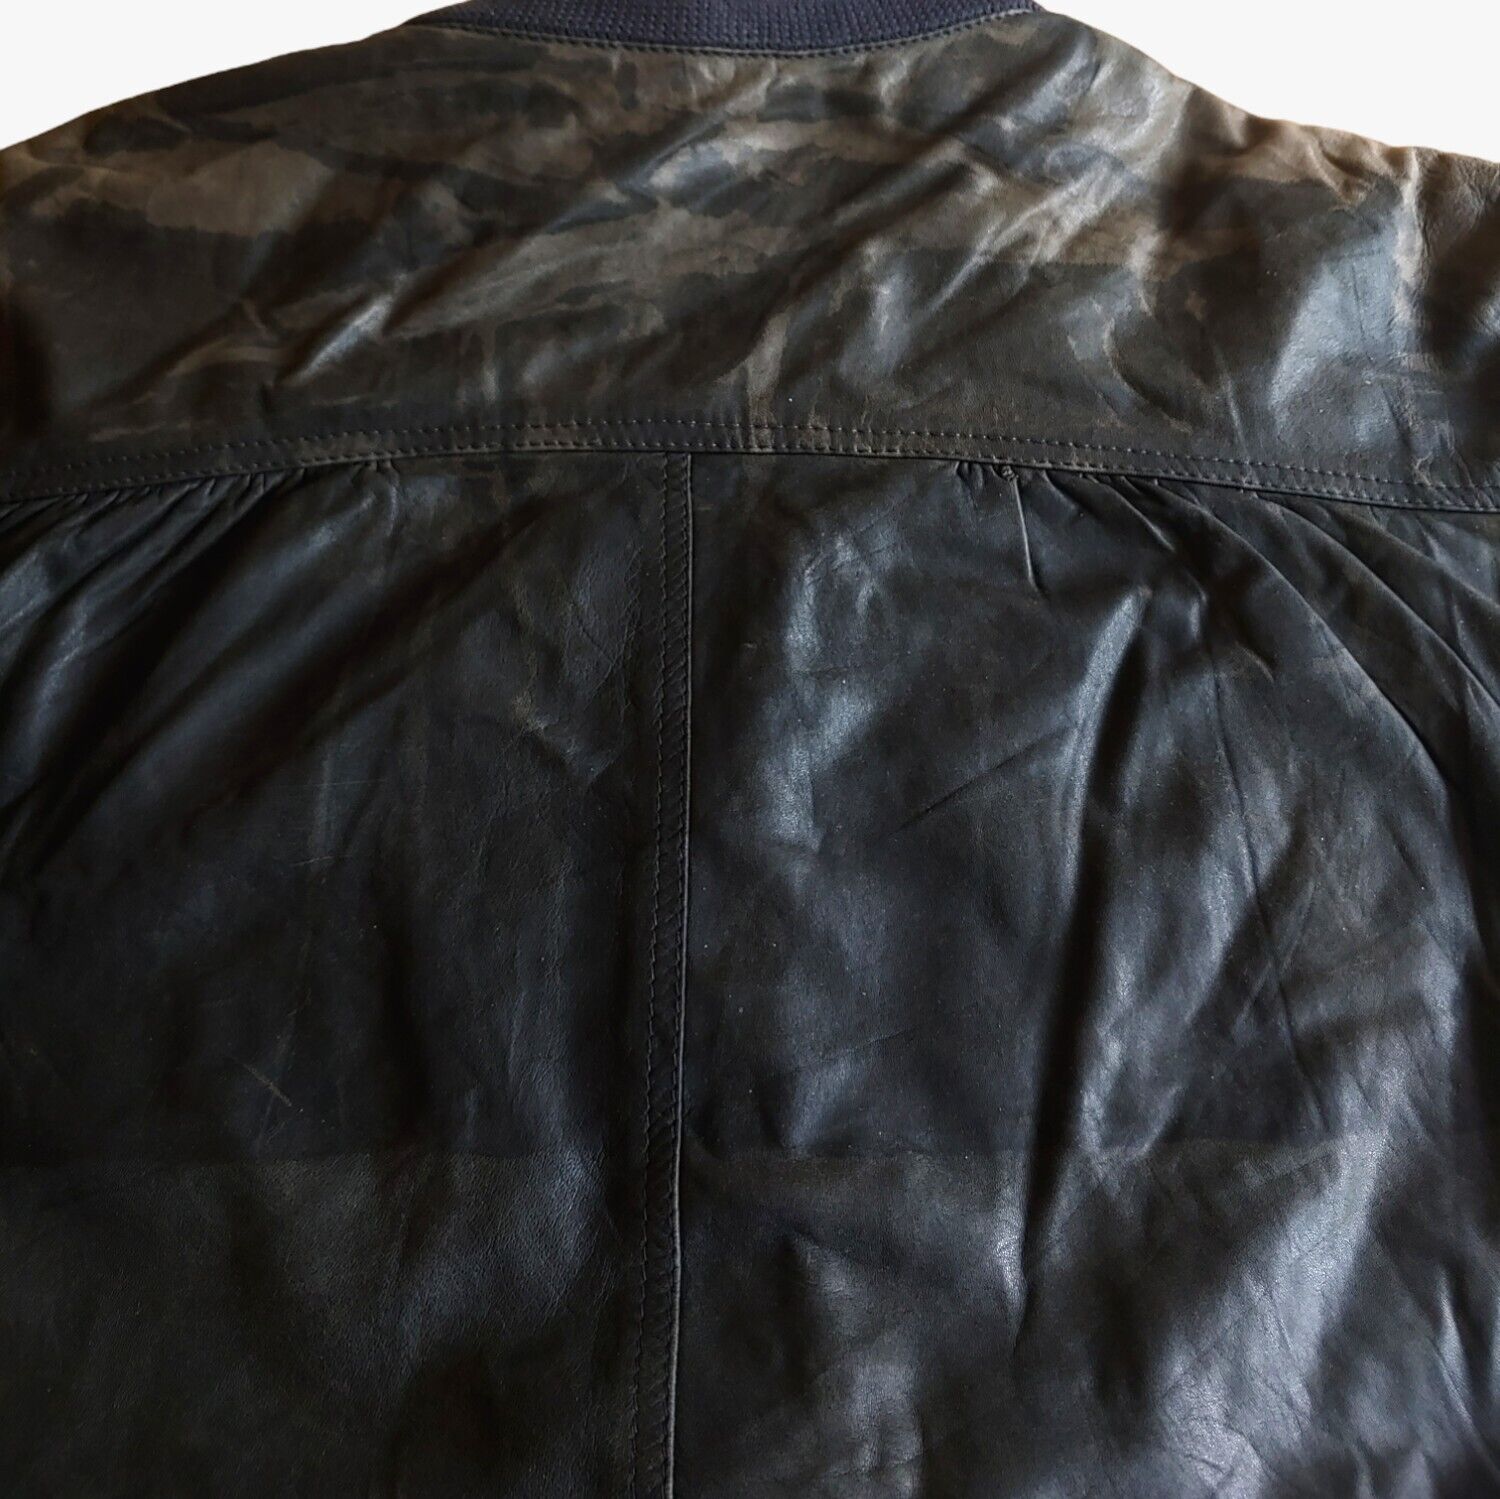 Vintage 1980s Burberry Leather Bomber Jacket With Navy Nova Check Lining Back - Casspios Dream